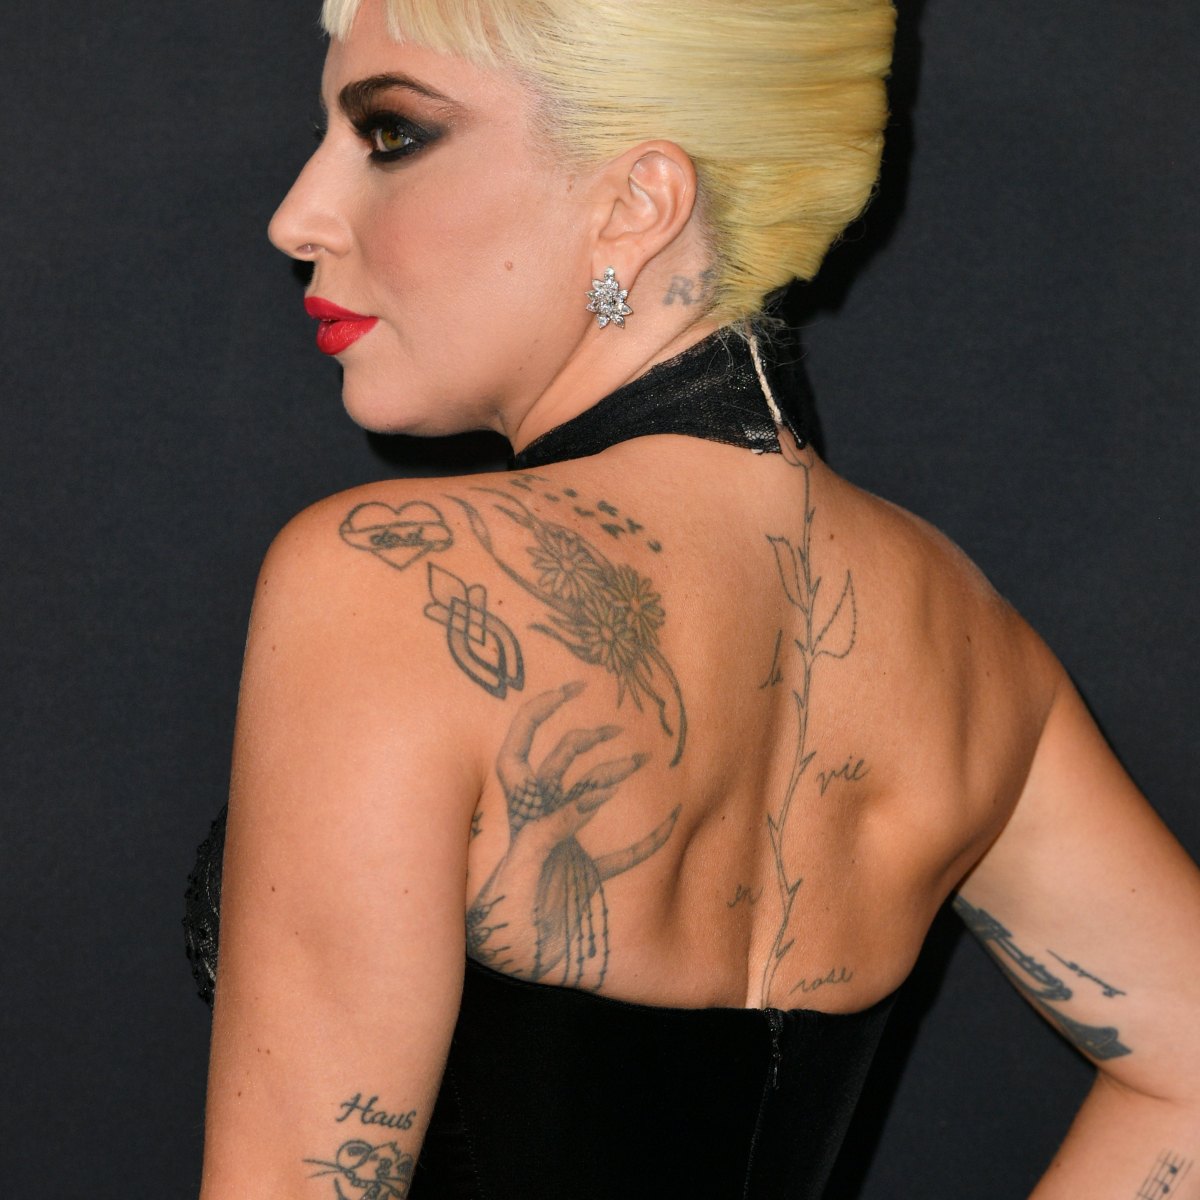 Lady Gaga Wears Sheer Halter Dress for 'House of Gucci' Premiere